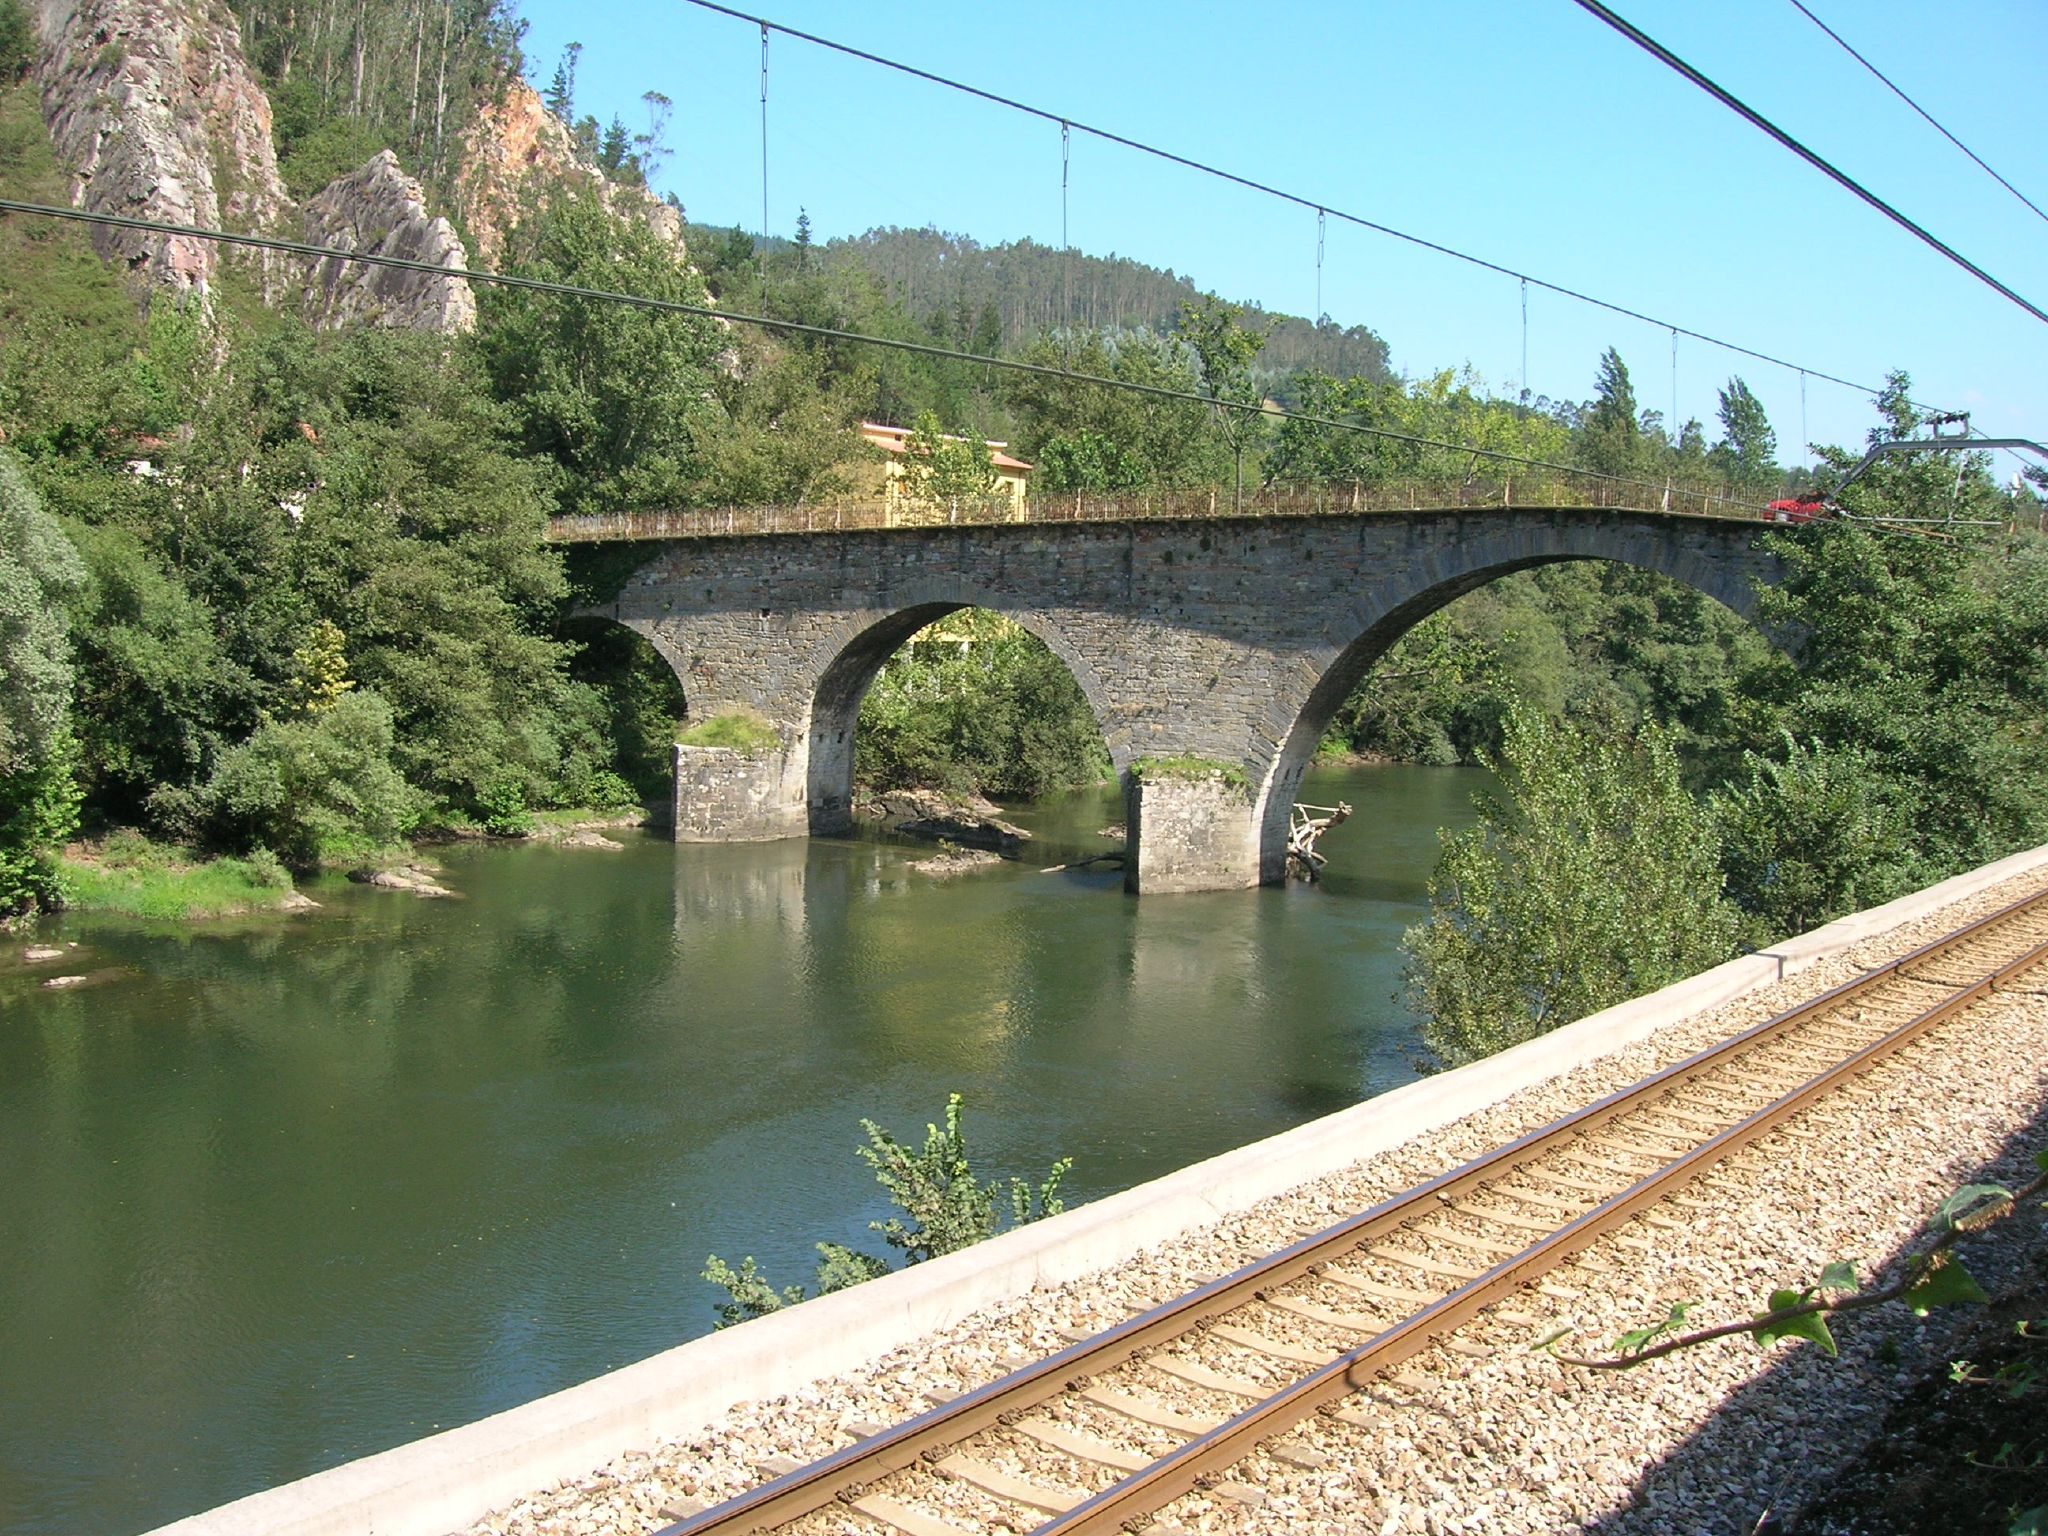 this is a view of a bridge over water